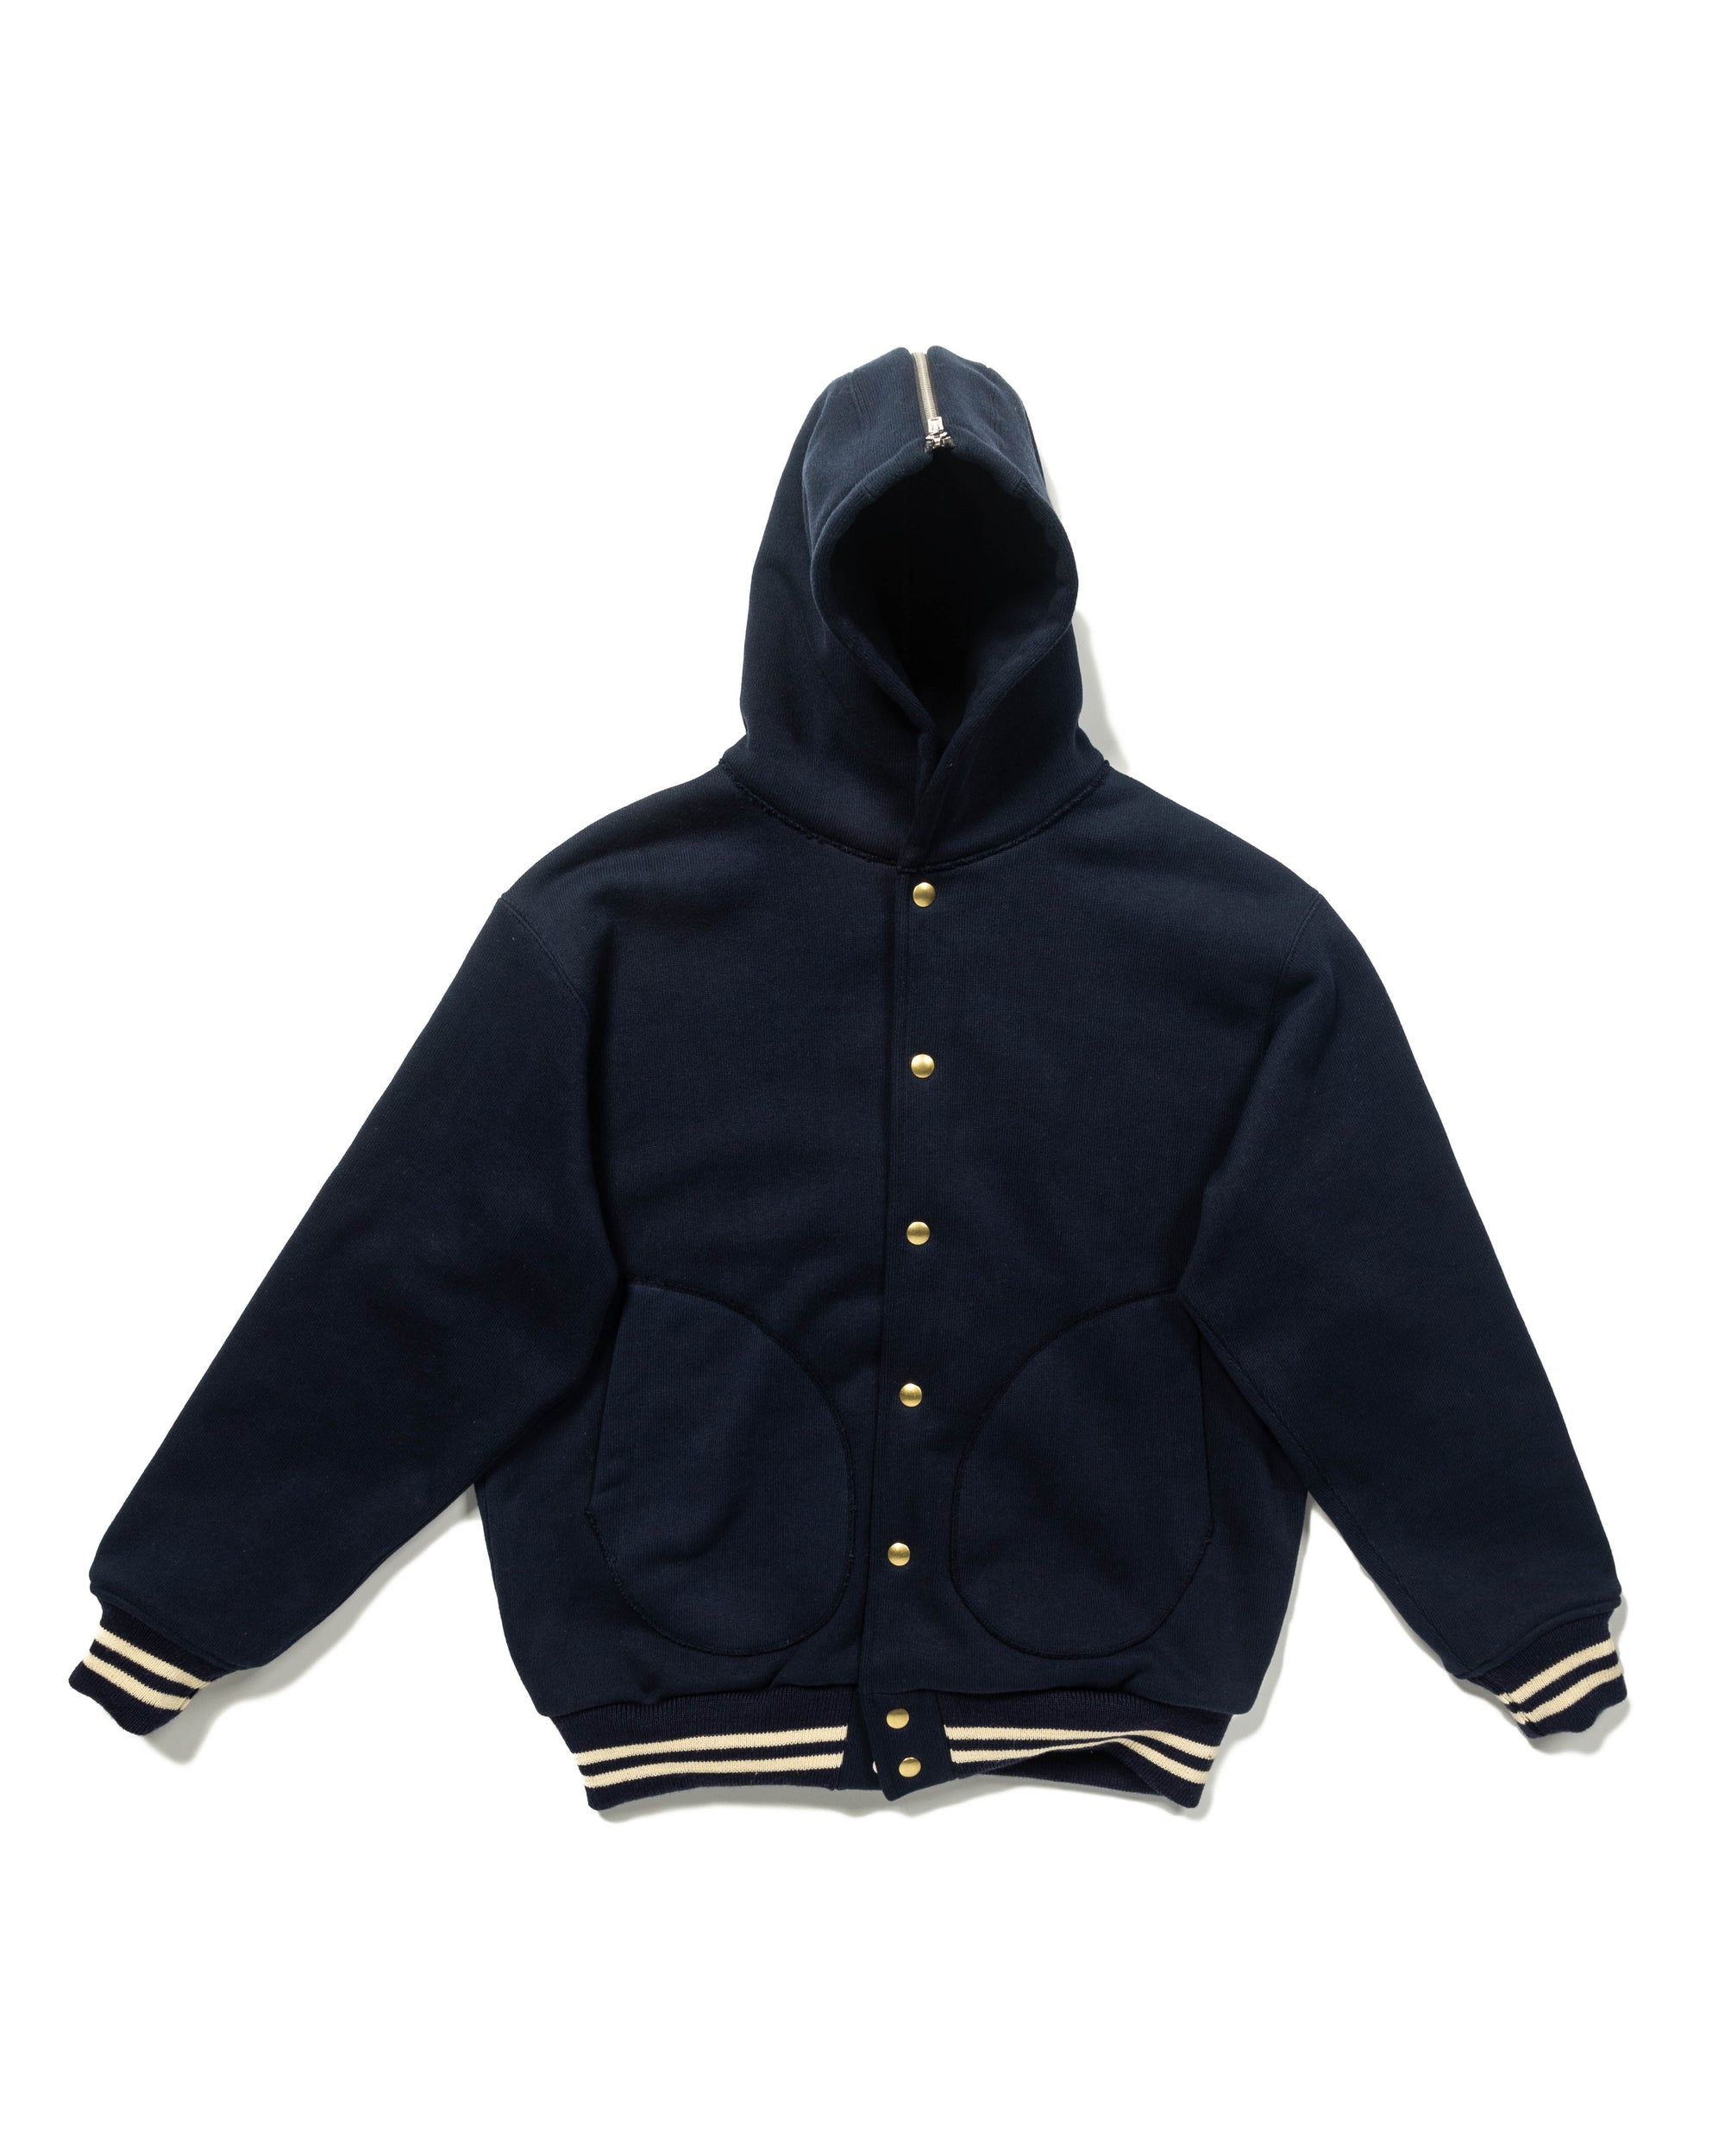 Double-jersey hooded sweatshirt with gold details and logo